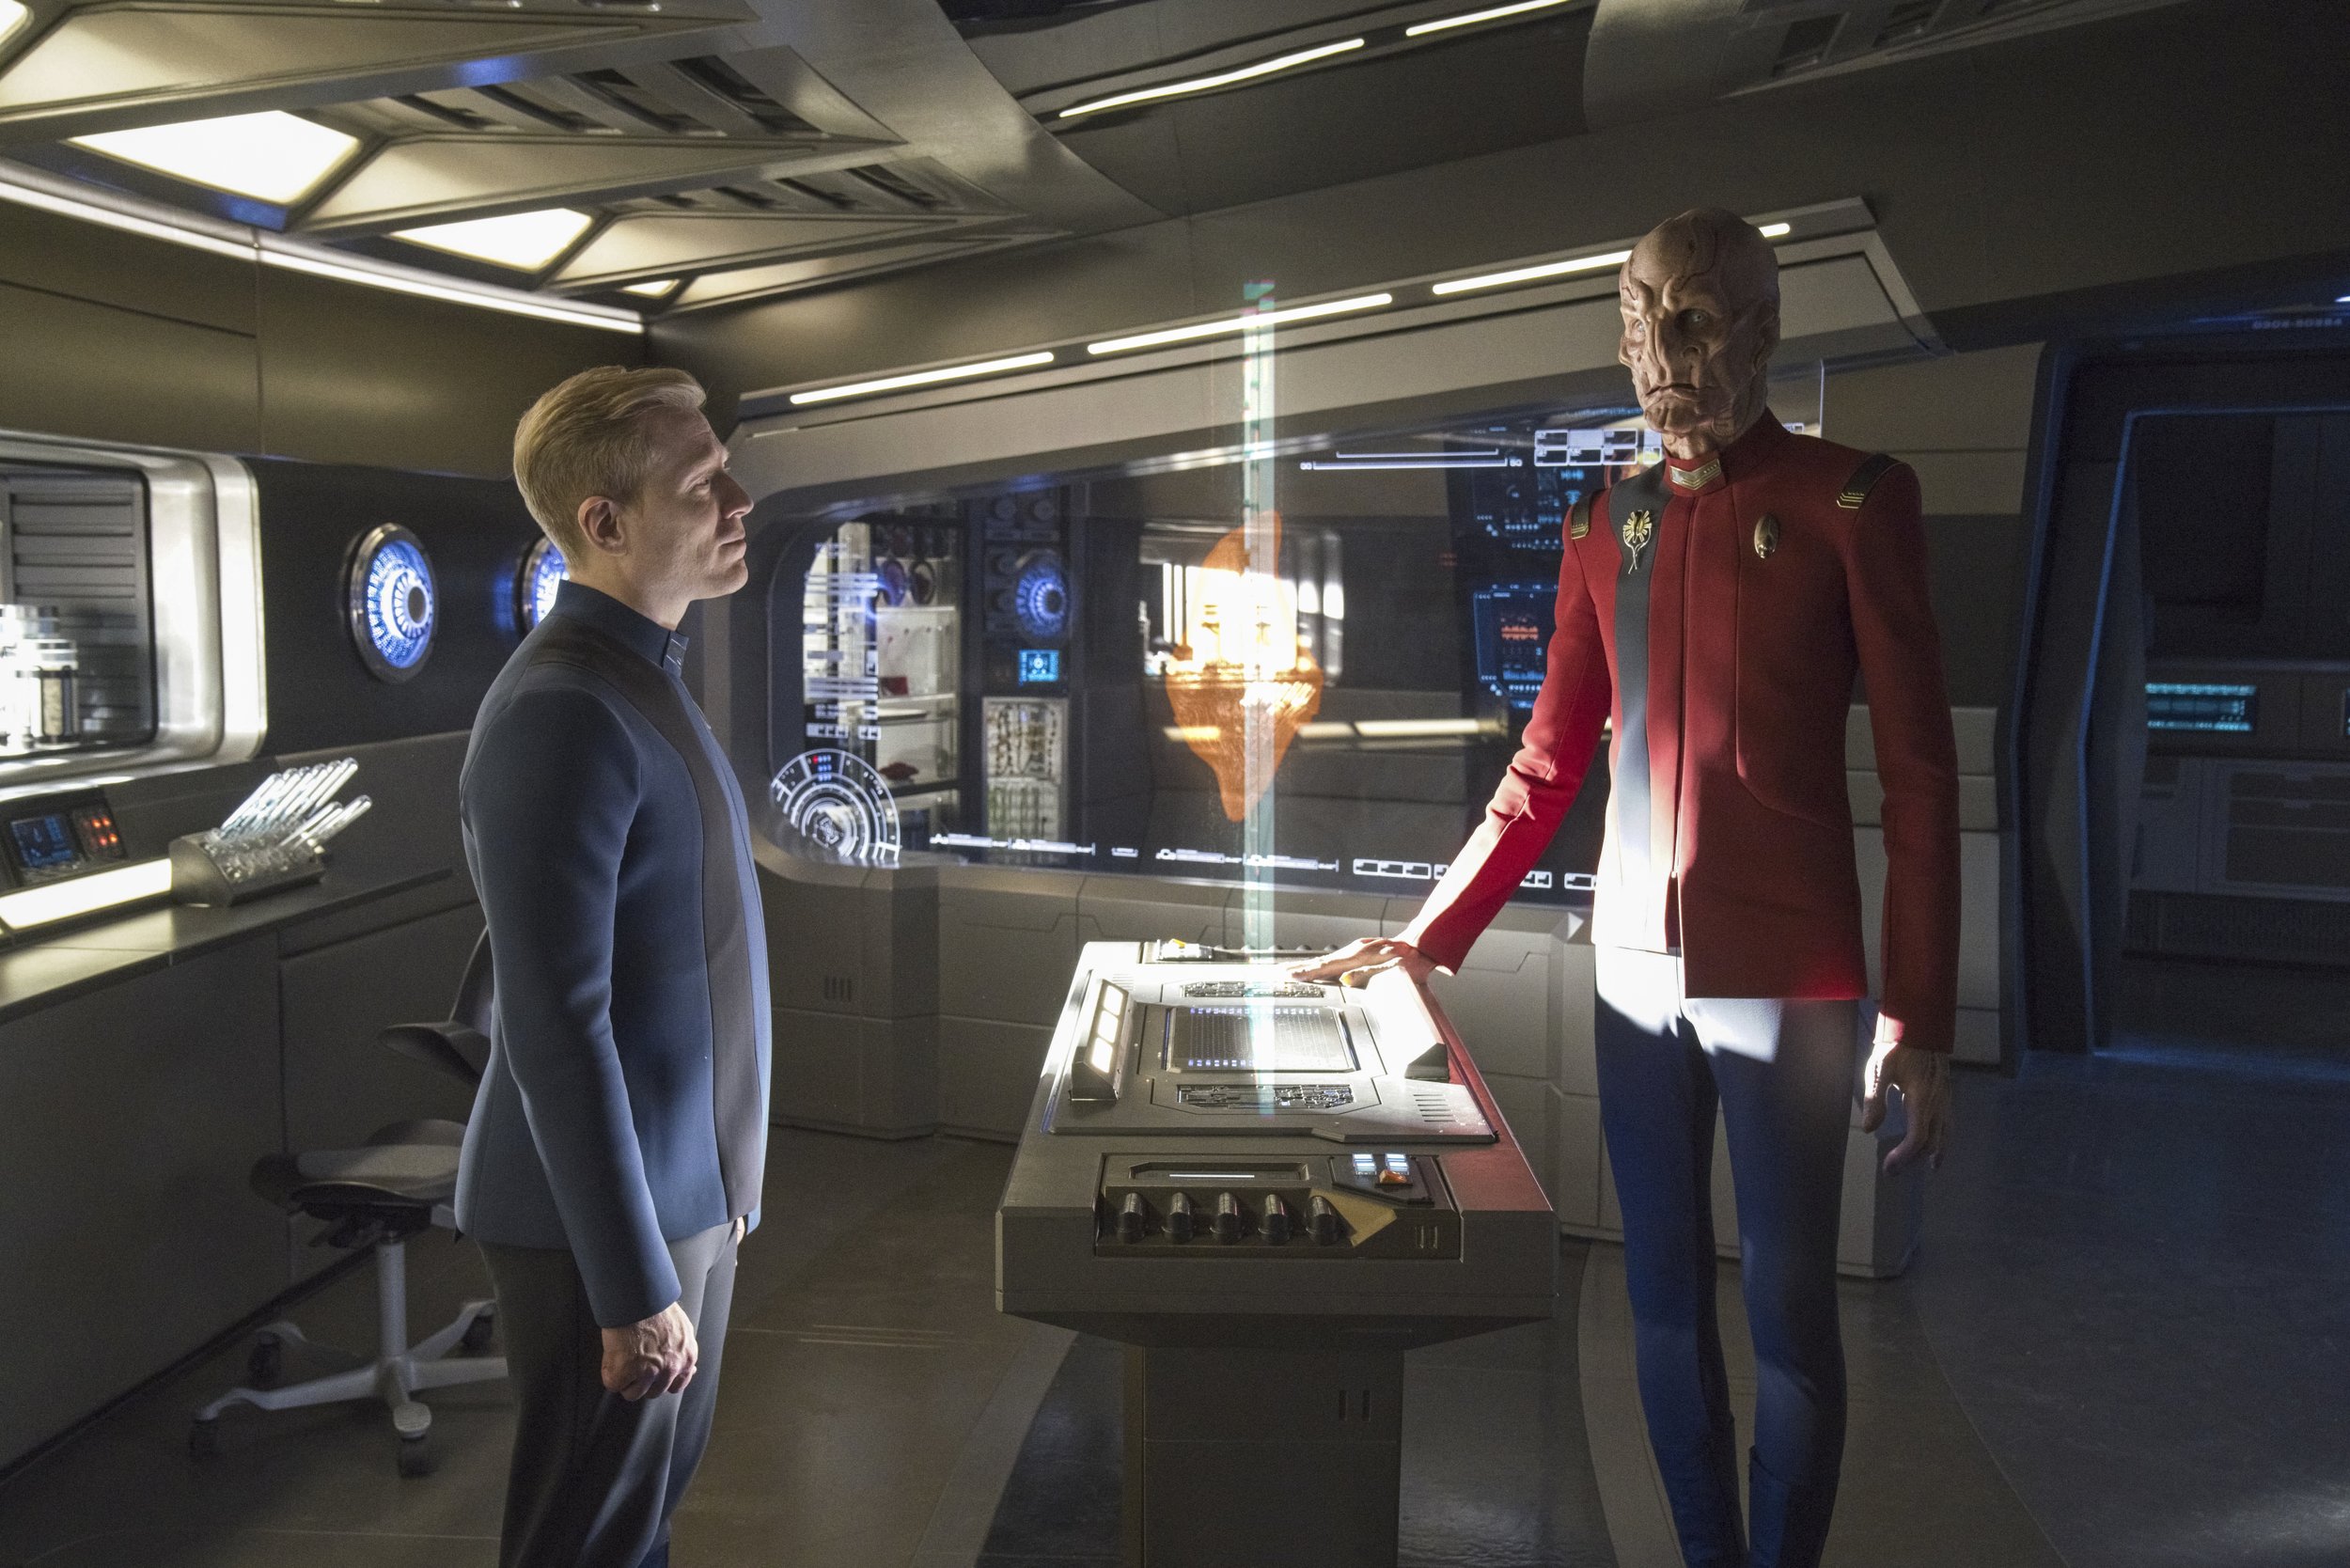   Pictured: Anthony Rapp as Stamets and Doug Jones as Saru of the Paramount+ original series STAR TREK: DISCOVERY. Photo Cr: Michael Gibson/Paramount+ (C) 2021 CBS Interactive. All Rights Reserved.  